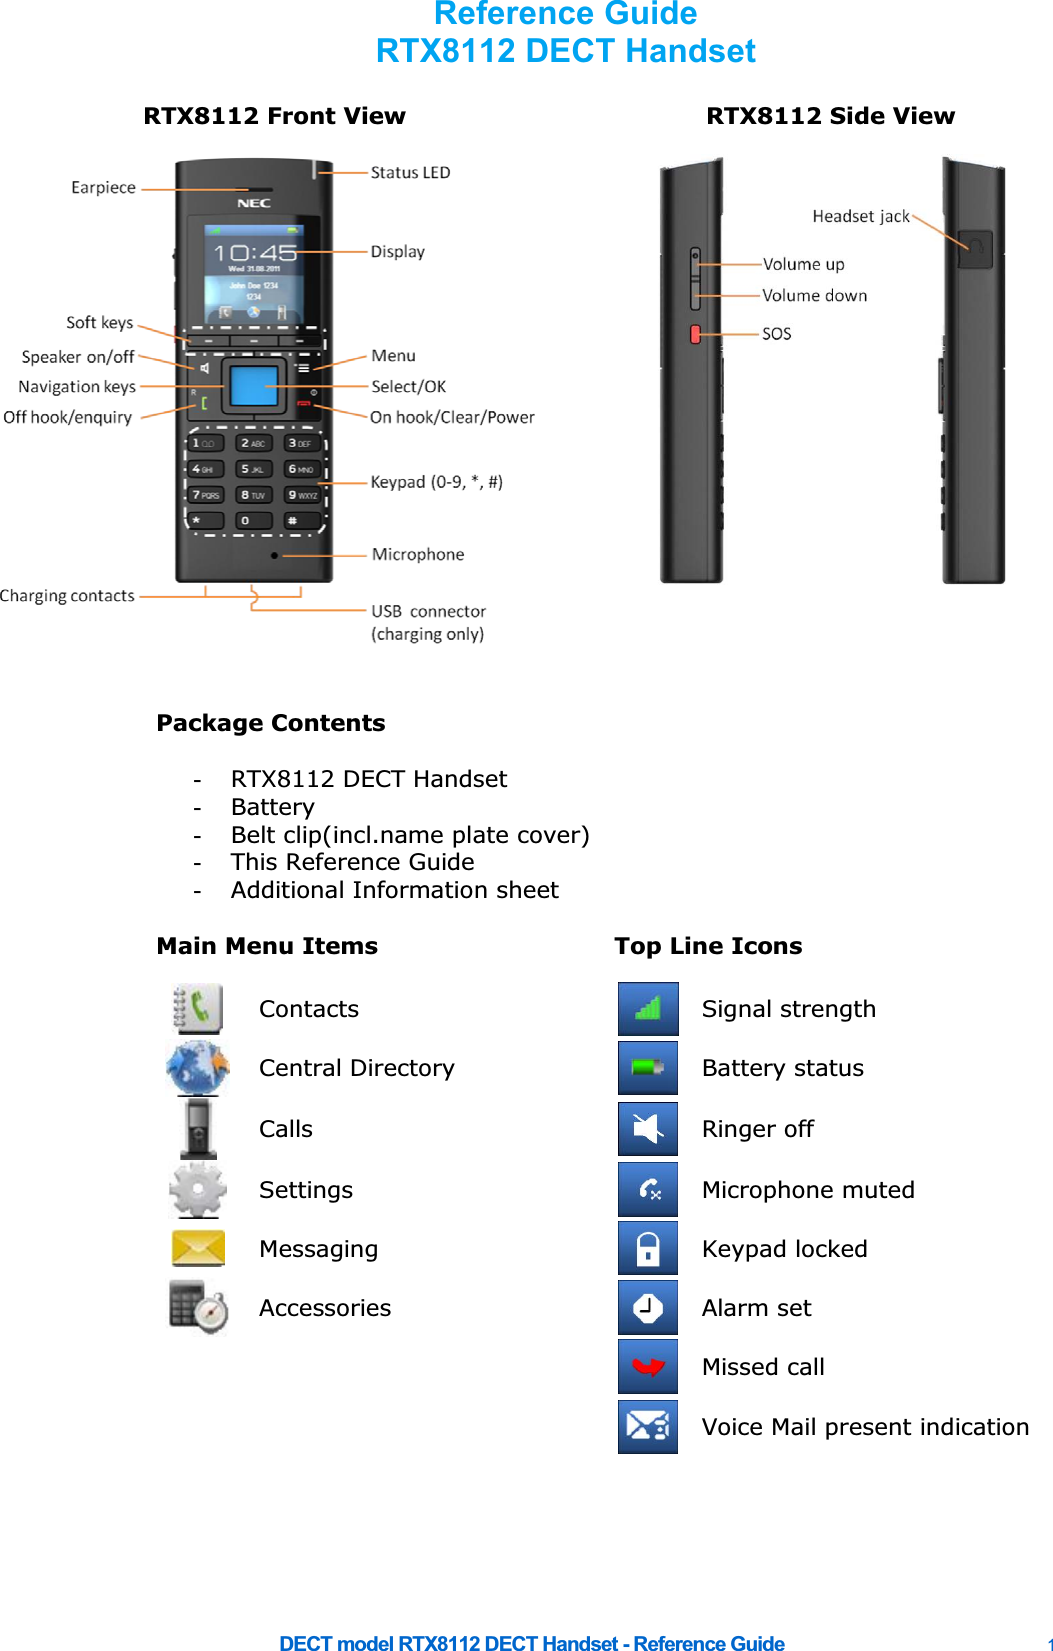     DECT model RTX8112 DECT Handset - Reference Guide    1 RTX8112 Front View  RTX8112 Side View    Package Contents    -  RTX8112 DECT Handset -  Battery -  Belt clip(incl.name plate cover) -  This Reference Guide -  Additional Information sheet    Main Menu Items  Top Line Icons       Contacts  Signal strength  Central Directory   Battery status Calls   Ringer off  Settings   Microphone muted  Messaging   Keypad locked  Accessories   Alarm set    Missed call    Voice Mail present indication       Reference Guide RTX8112 DECT Handset  